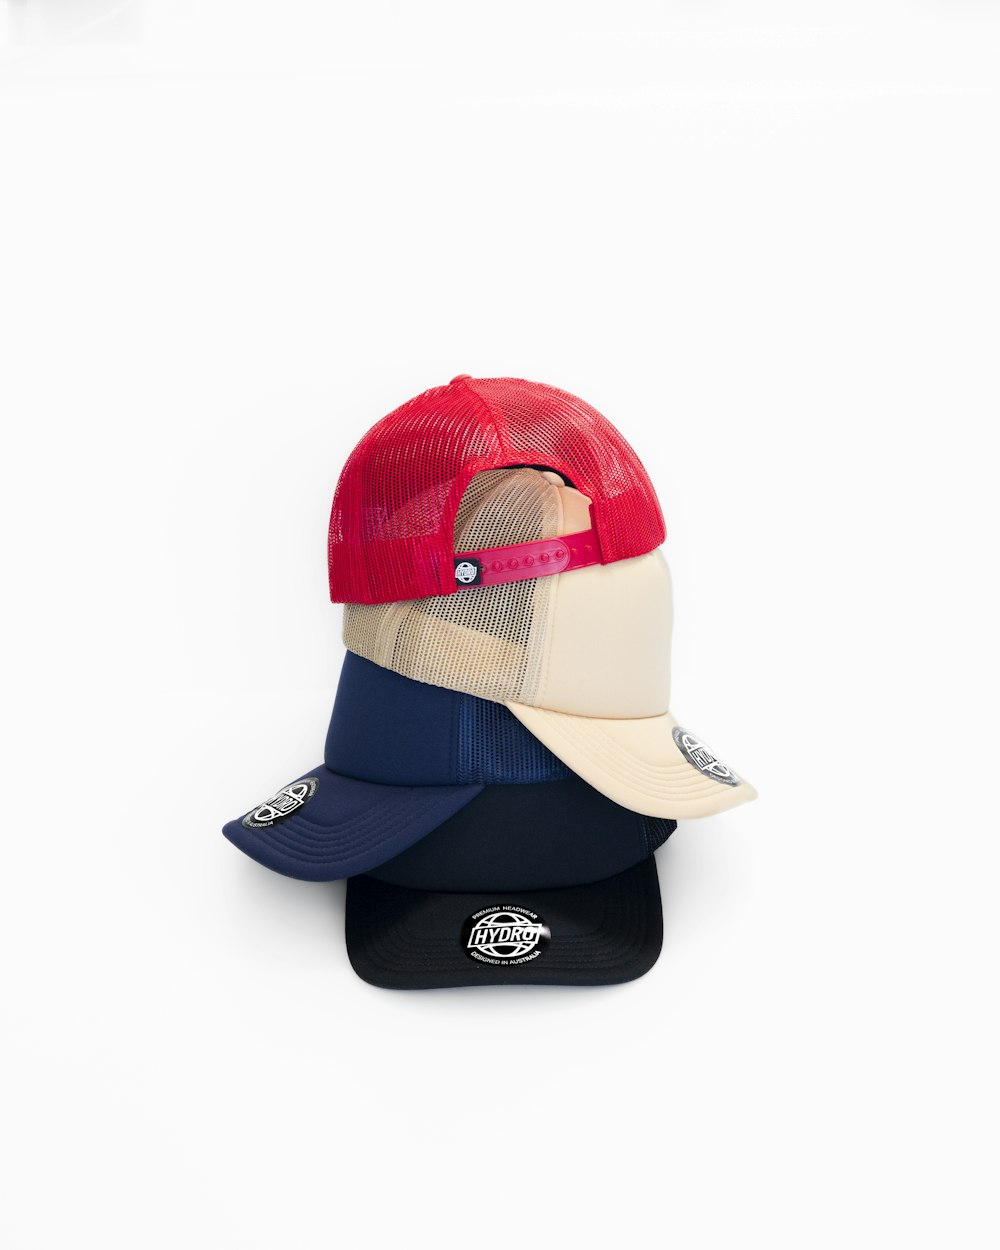 a red, white and blue hat on a white background